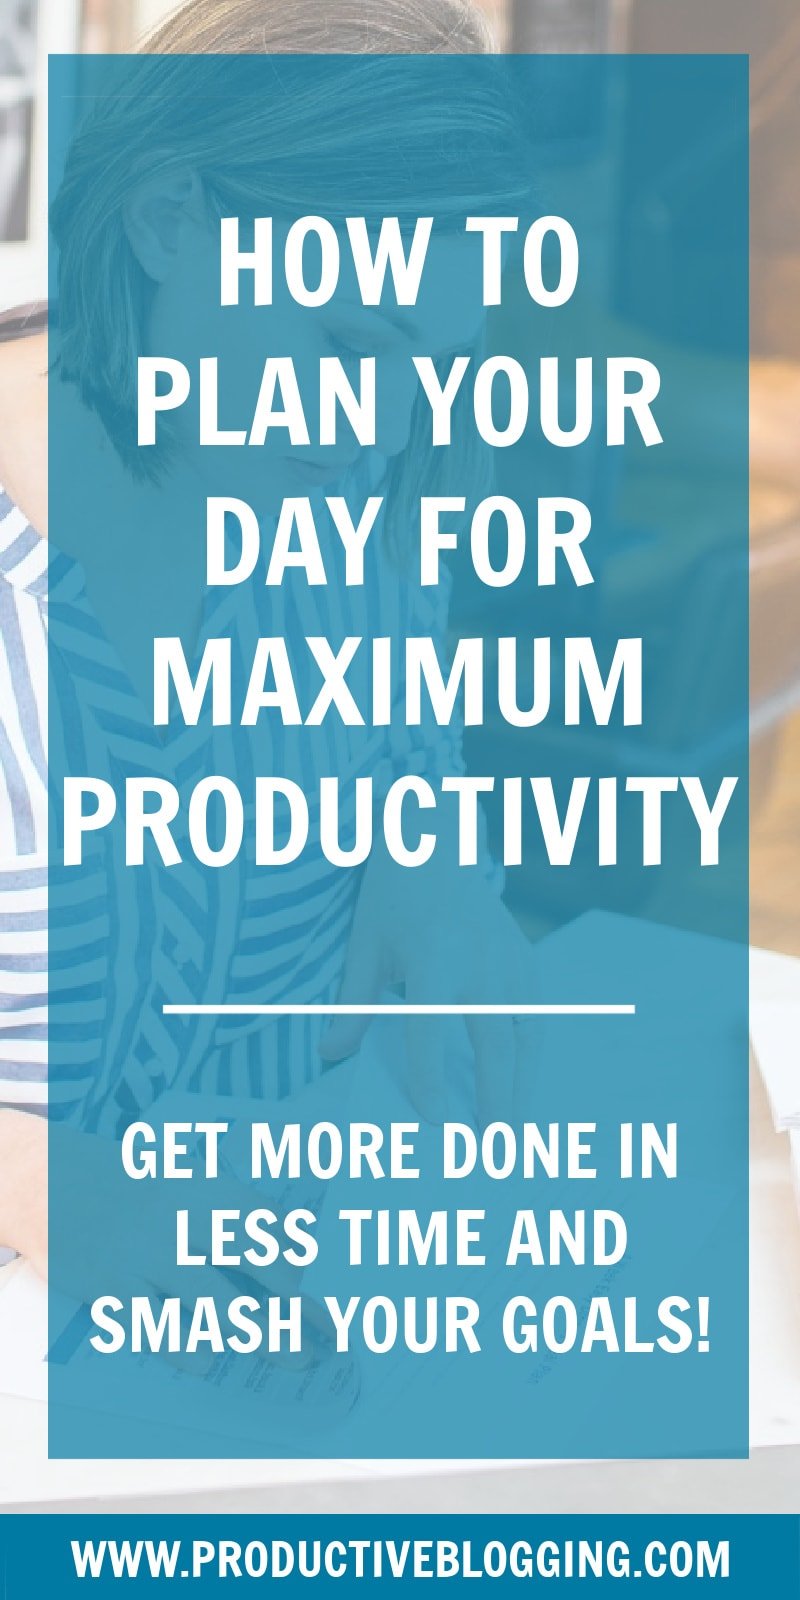 Given time is finite, it makes sense to use it as wisely as possible. Here’s how to plan your day for maximum productivity… #todolist #dailyplanning #timeblocking #goalsetting #settinggoals #goalplanning #dailyactionplan #goalsuccess #goalfocused #productivity #productivityhabits #productivityhacks #boostproductivity #blogplanning #planning #timemanagement #blogginggoals #blog #blogging #blogger #bloggingtips #getorganized #productivitytips #productiveblogging #worksmarternotharder